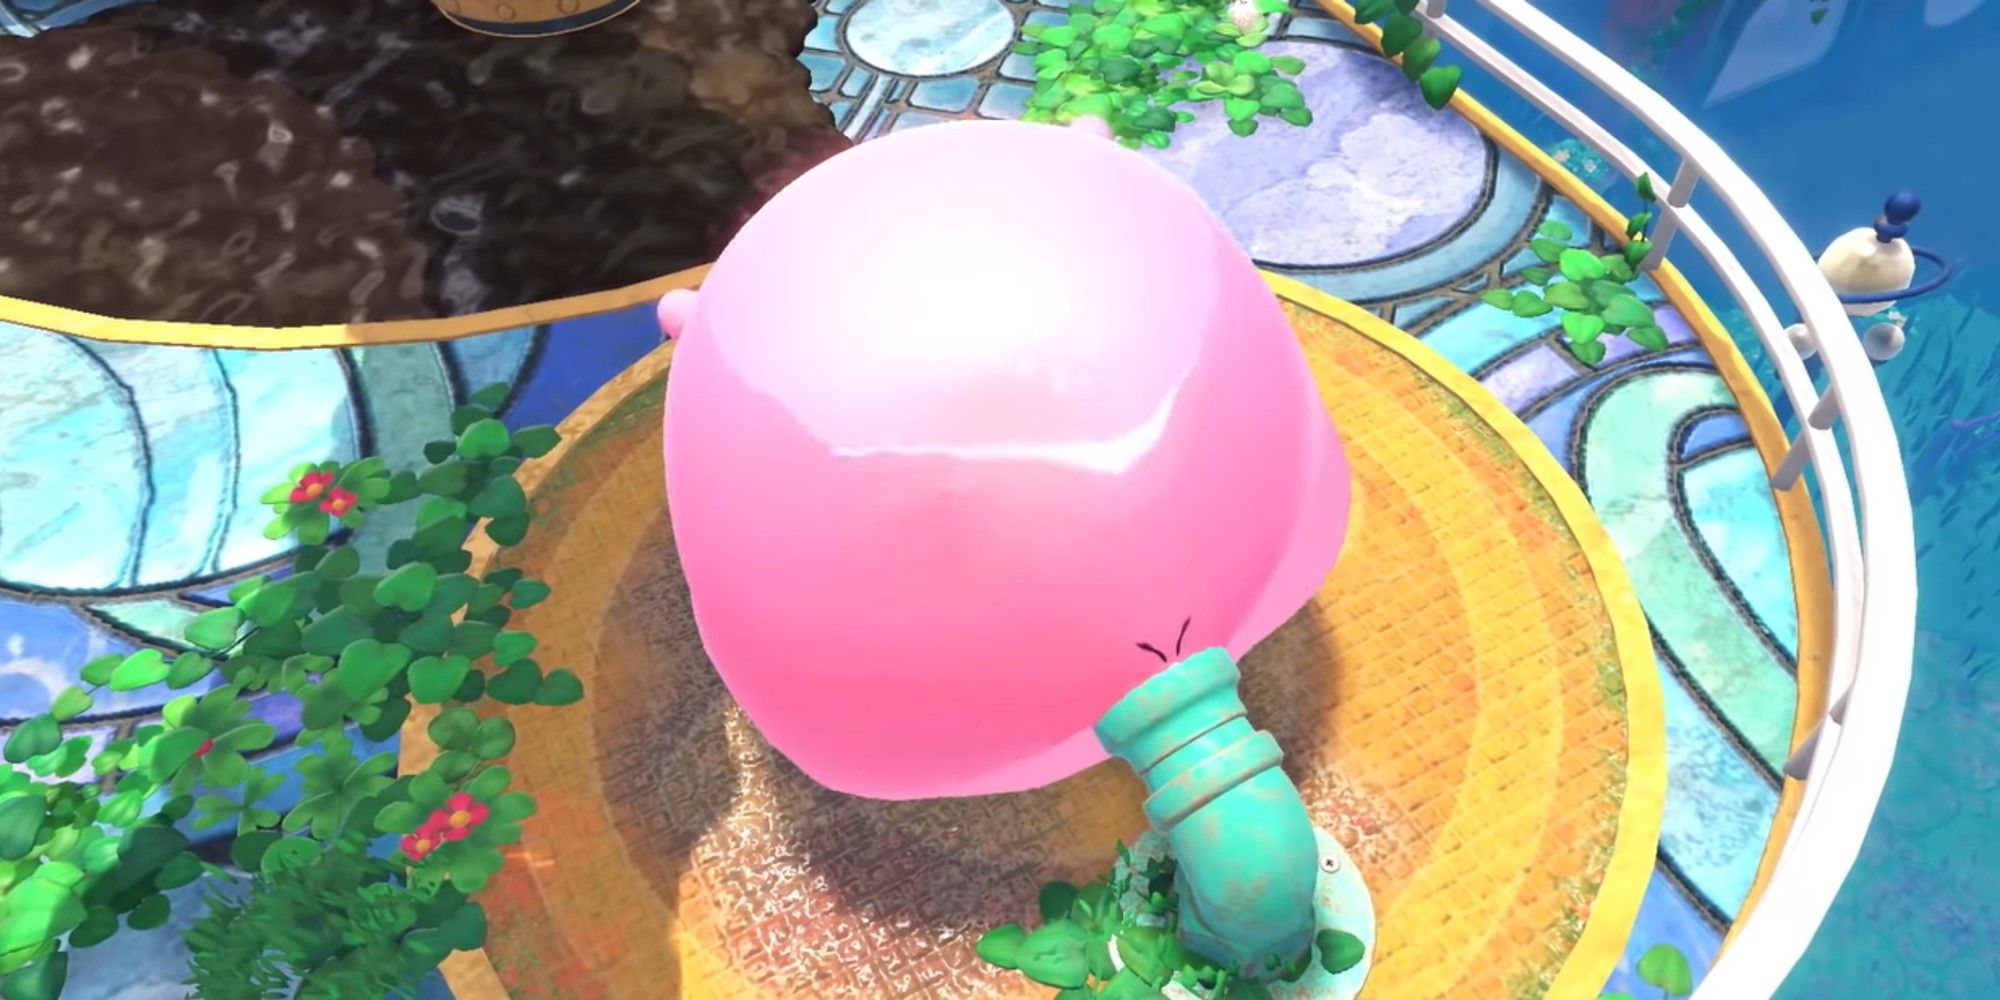 kirby filled with water